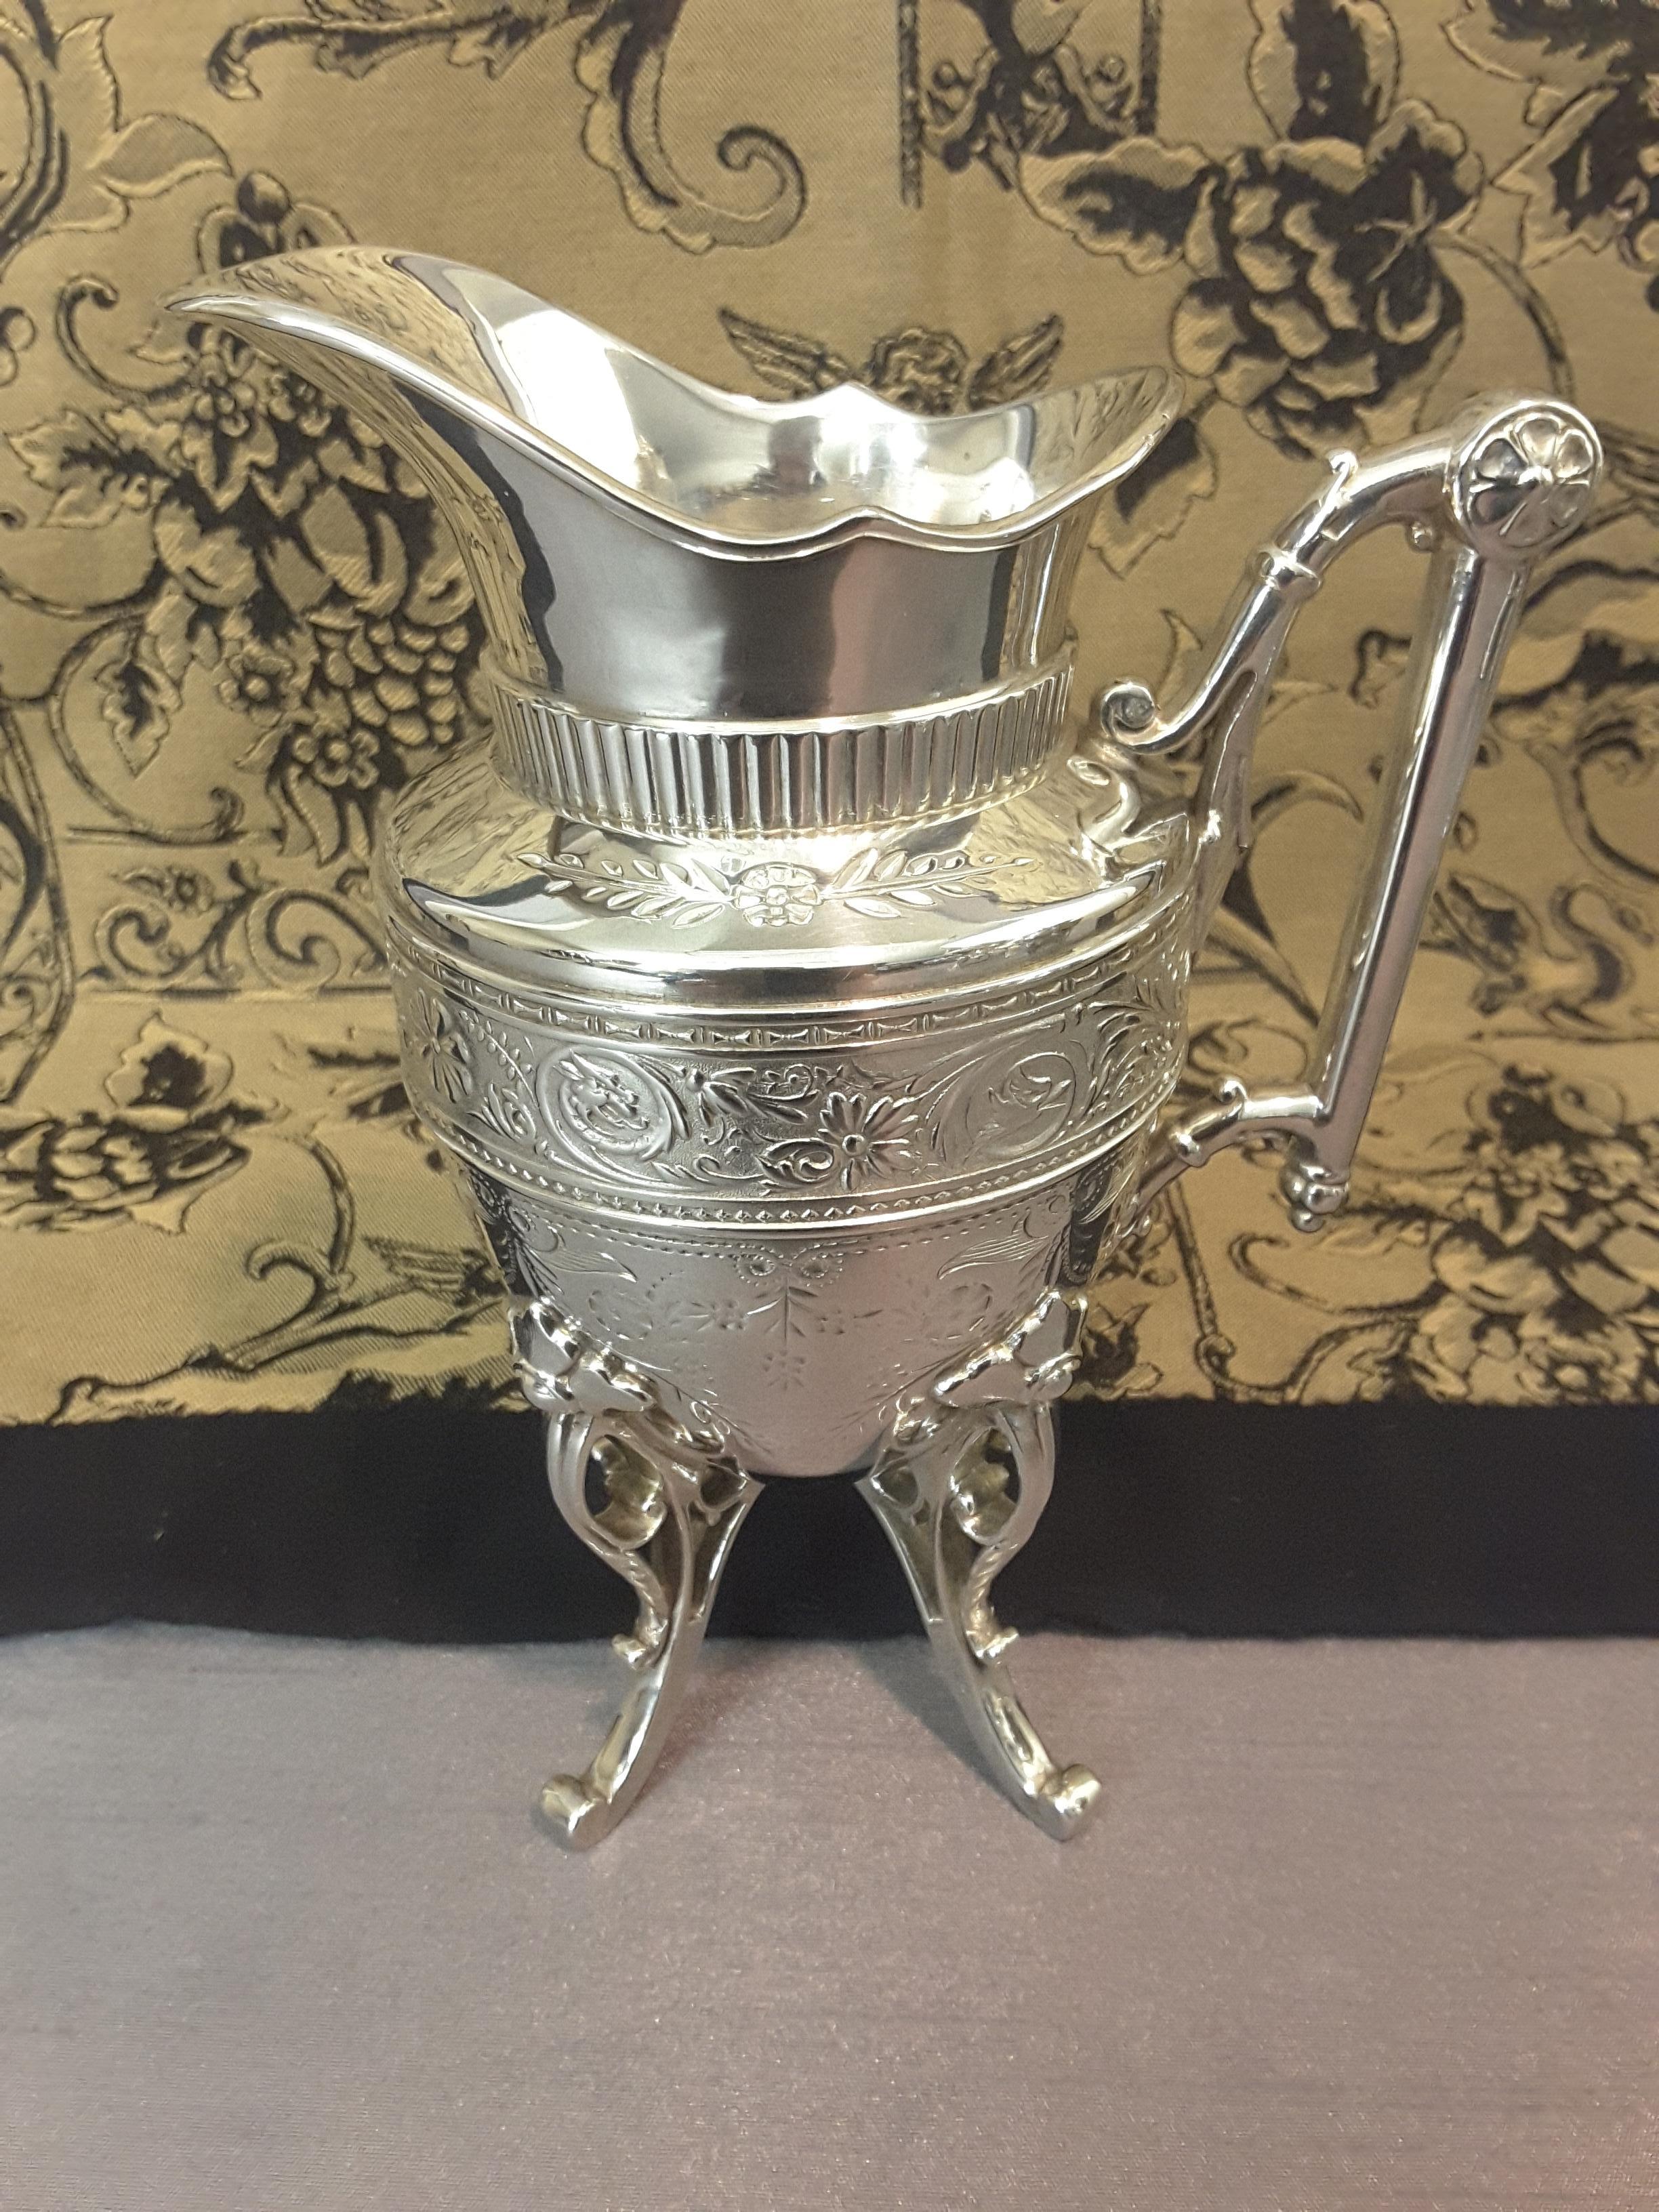 Exquisite Aesthetic Movement Silverplated Tea Service by Simpson, Hall & Miller For Sale 6